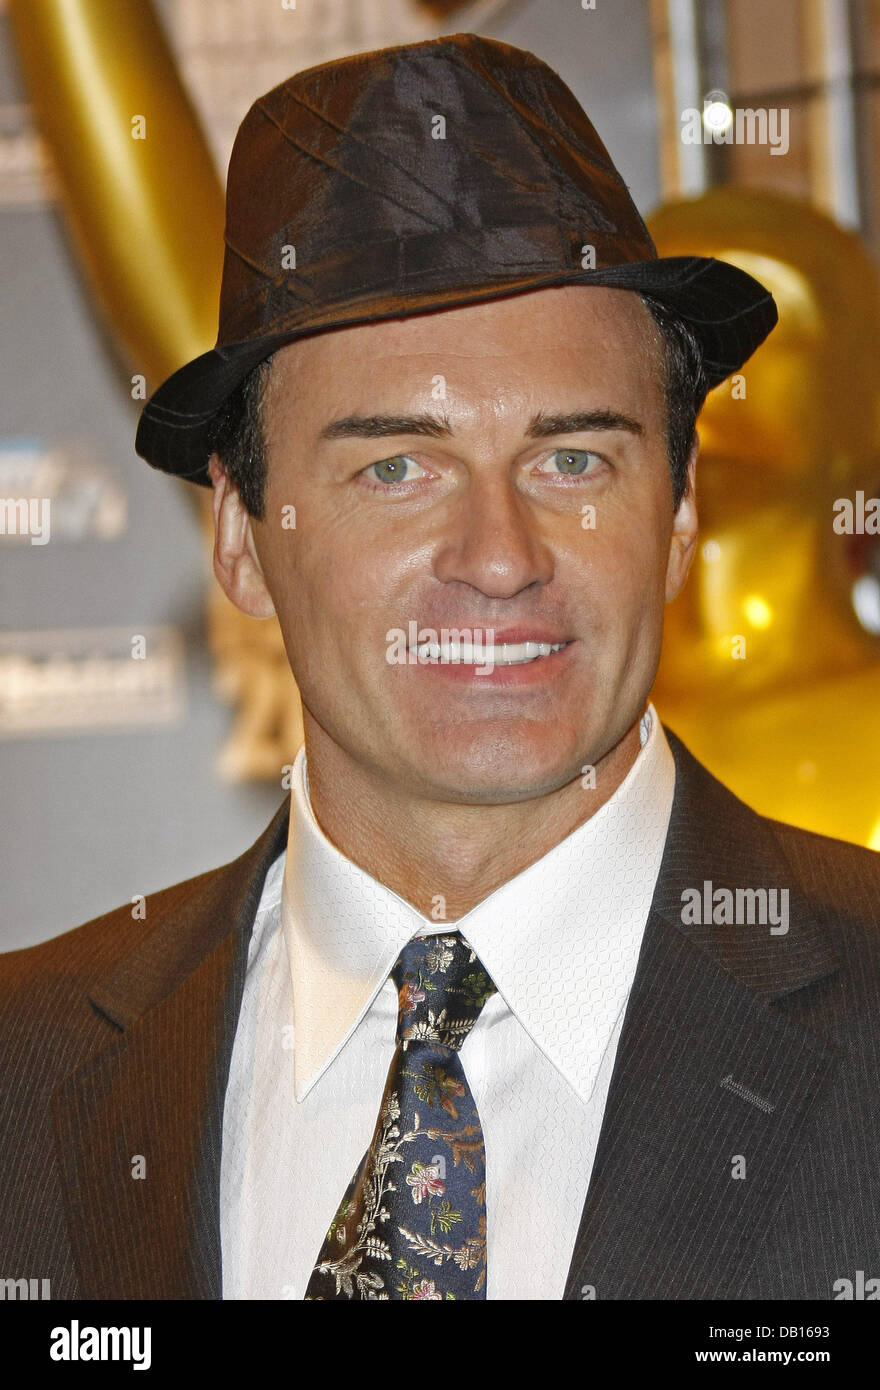 Show host Julian McMahon arrives at the 2007 World Music Awards taking place at the Sporting Club in Monte Carlo, Monaco, 04 November 2007. Photo: Hubert Boesl Stock Photo